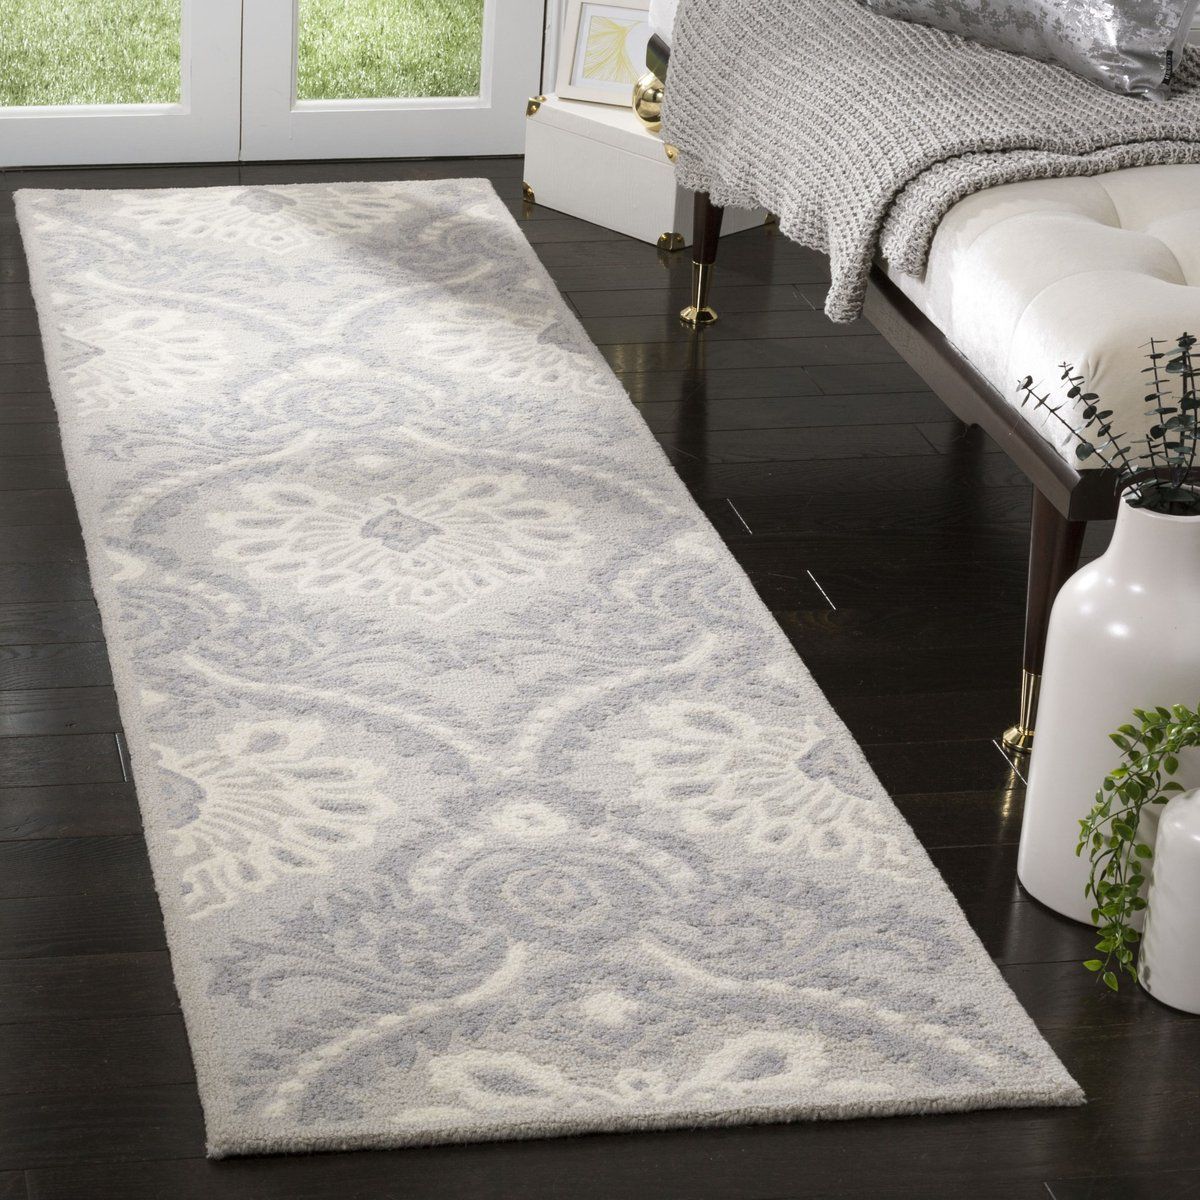 Safavieh Blossom Blm 106 Rugs | Rugs Direct Throughout Ivory Blossom Oval Rugs (View 12 of 15)